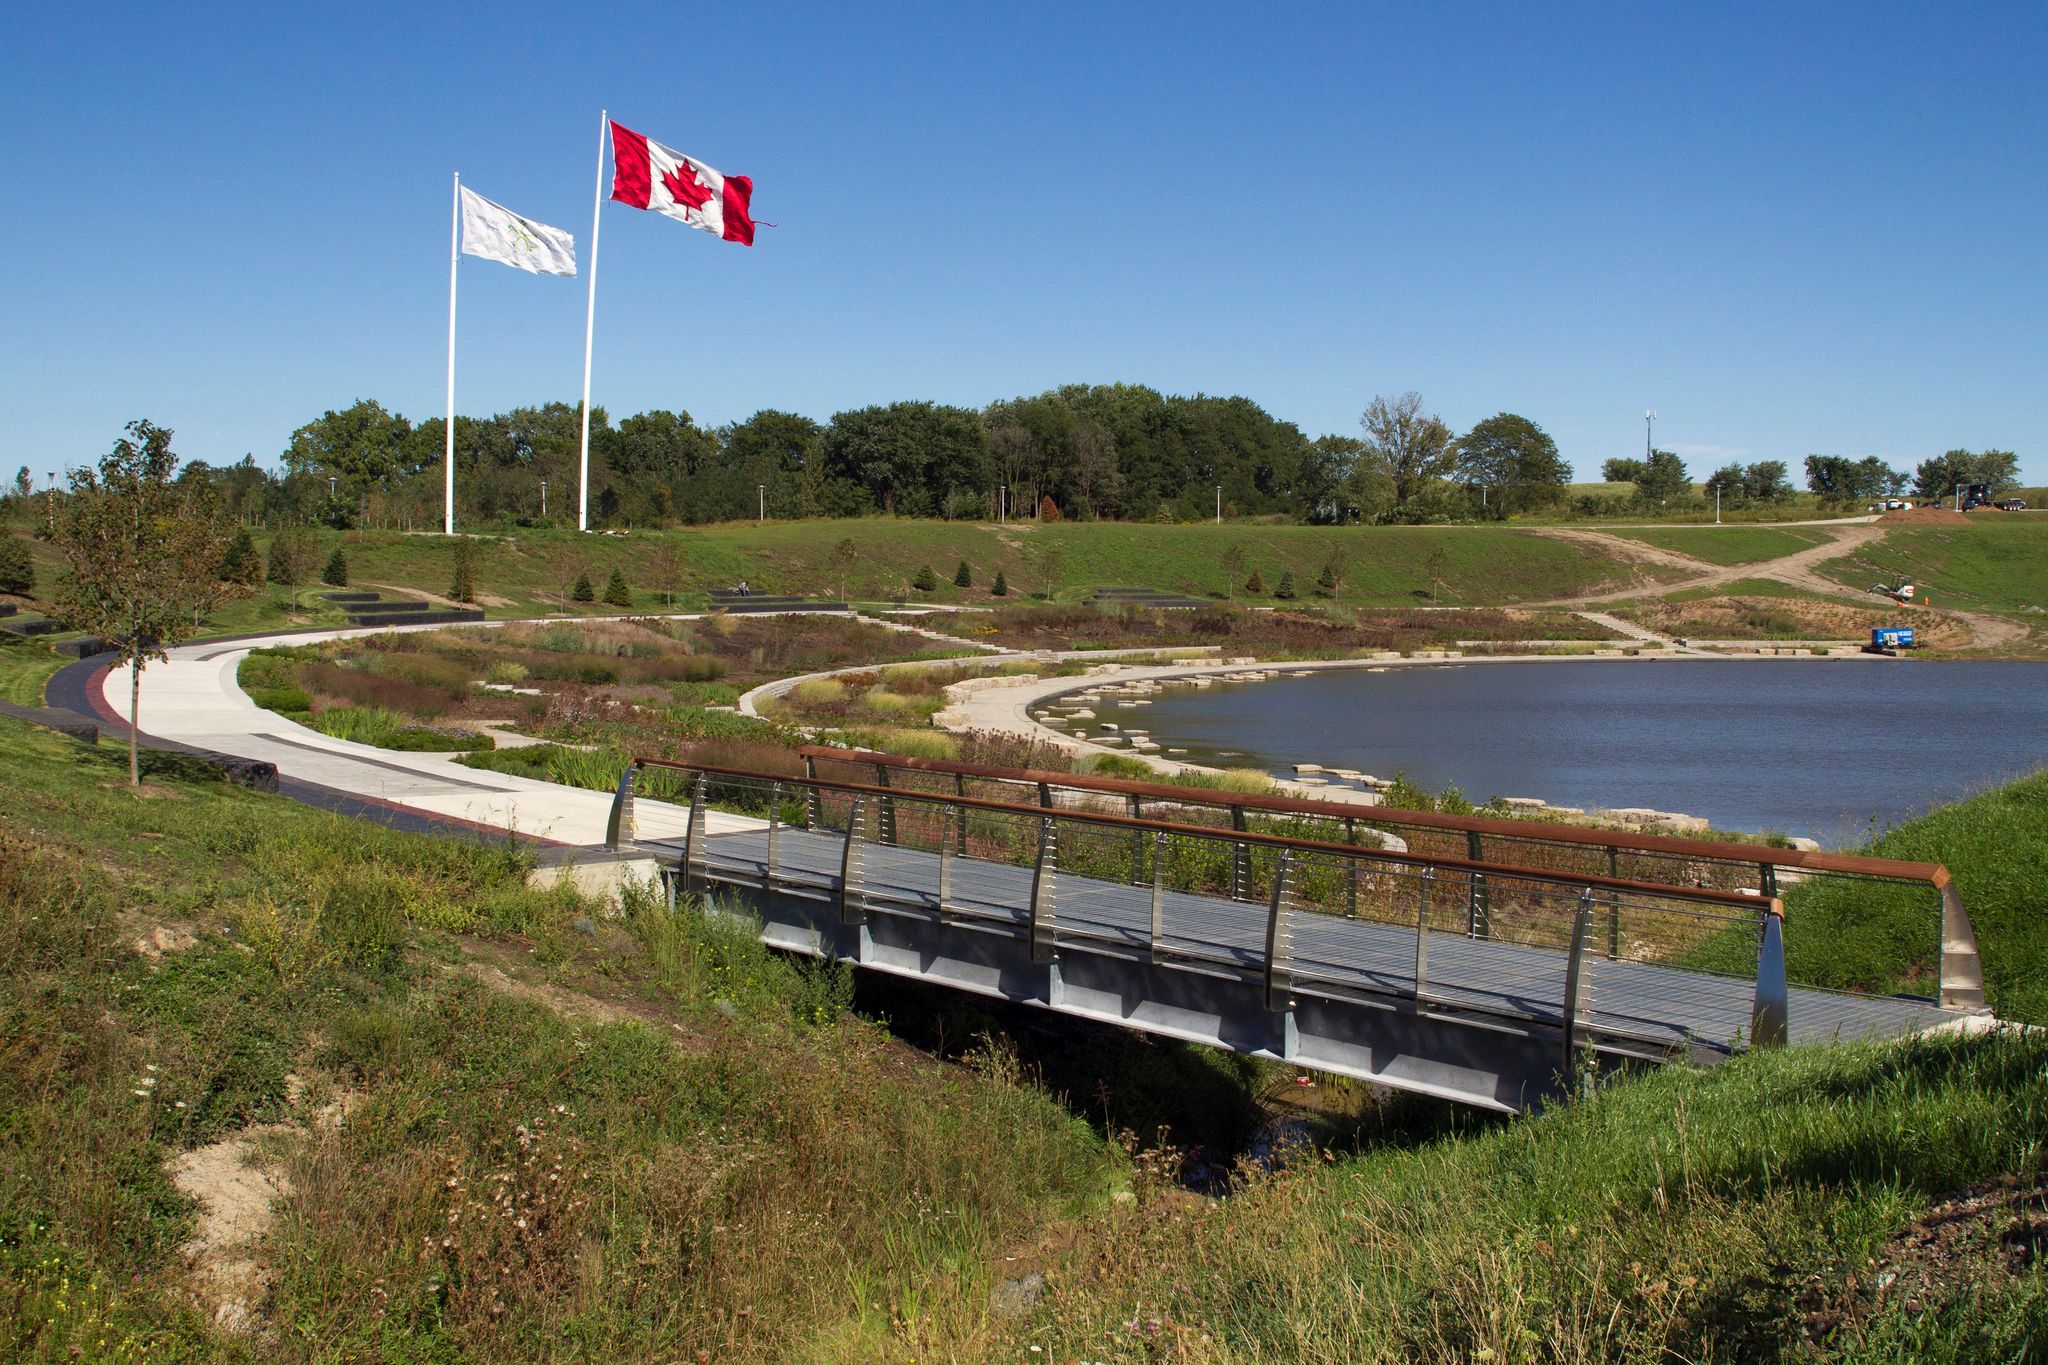 Best Things to Do in Ontario: Toronto’s Downsview Park offers Discovery, Adventure and Connections with the Outdoors